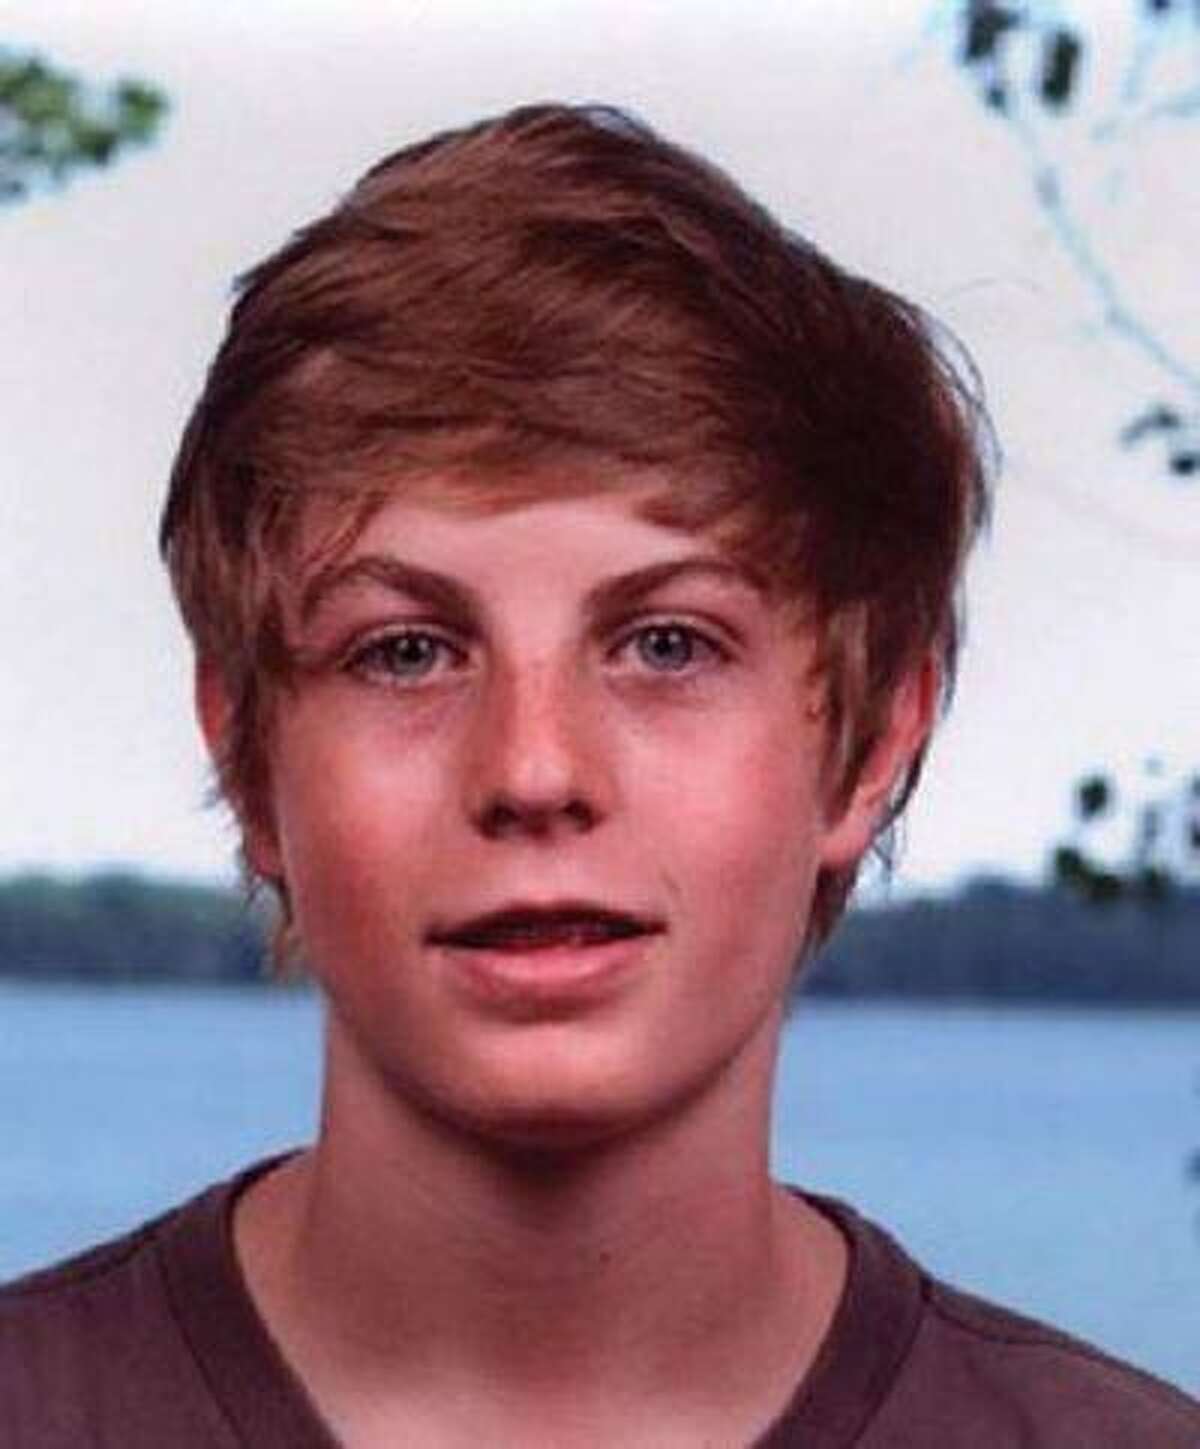 Taft Conlin, 13, died in an inbounds avalanche while skiing Vail's Prima Cornice in 2012. (Special to The Denver Post)